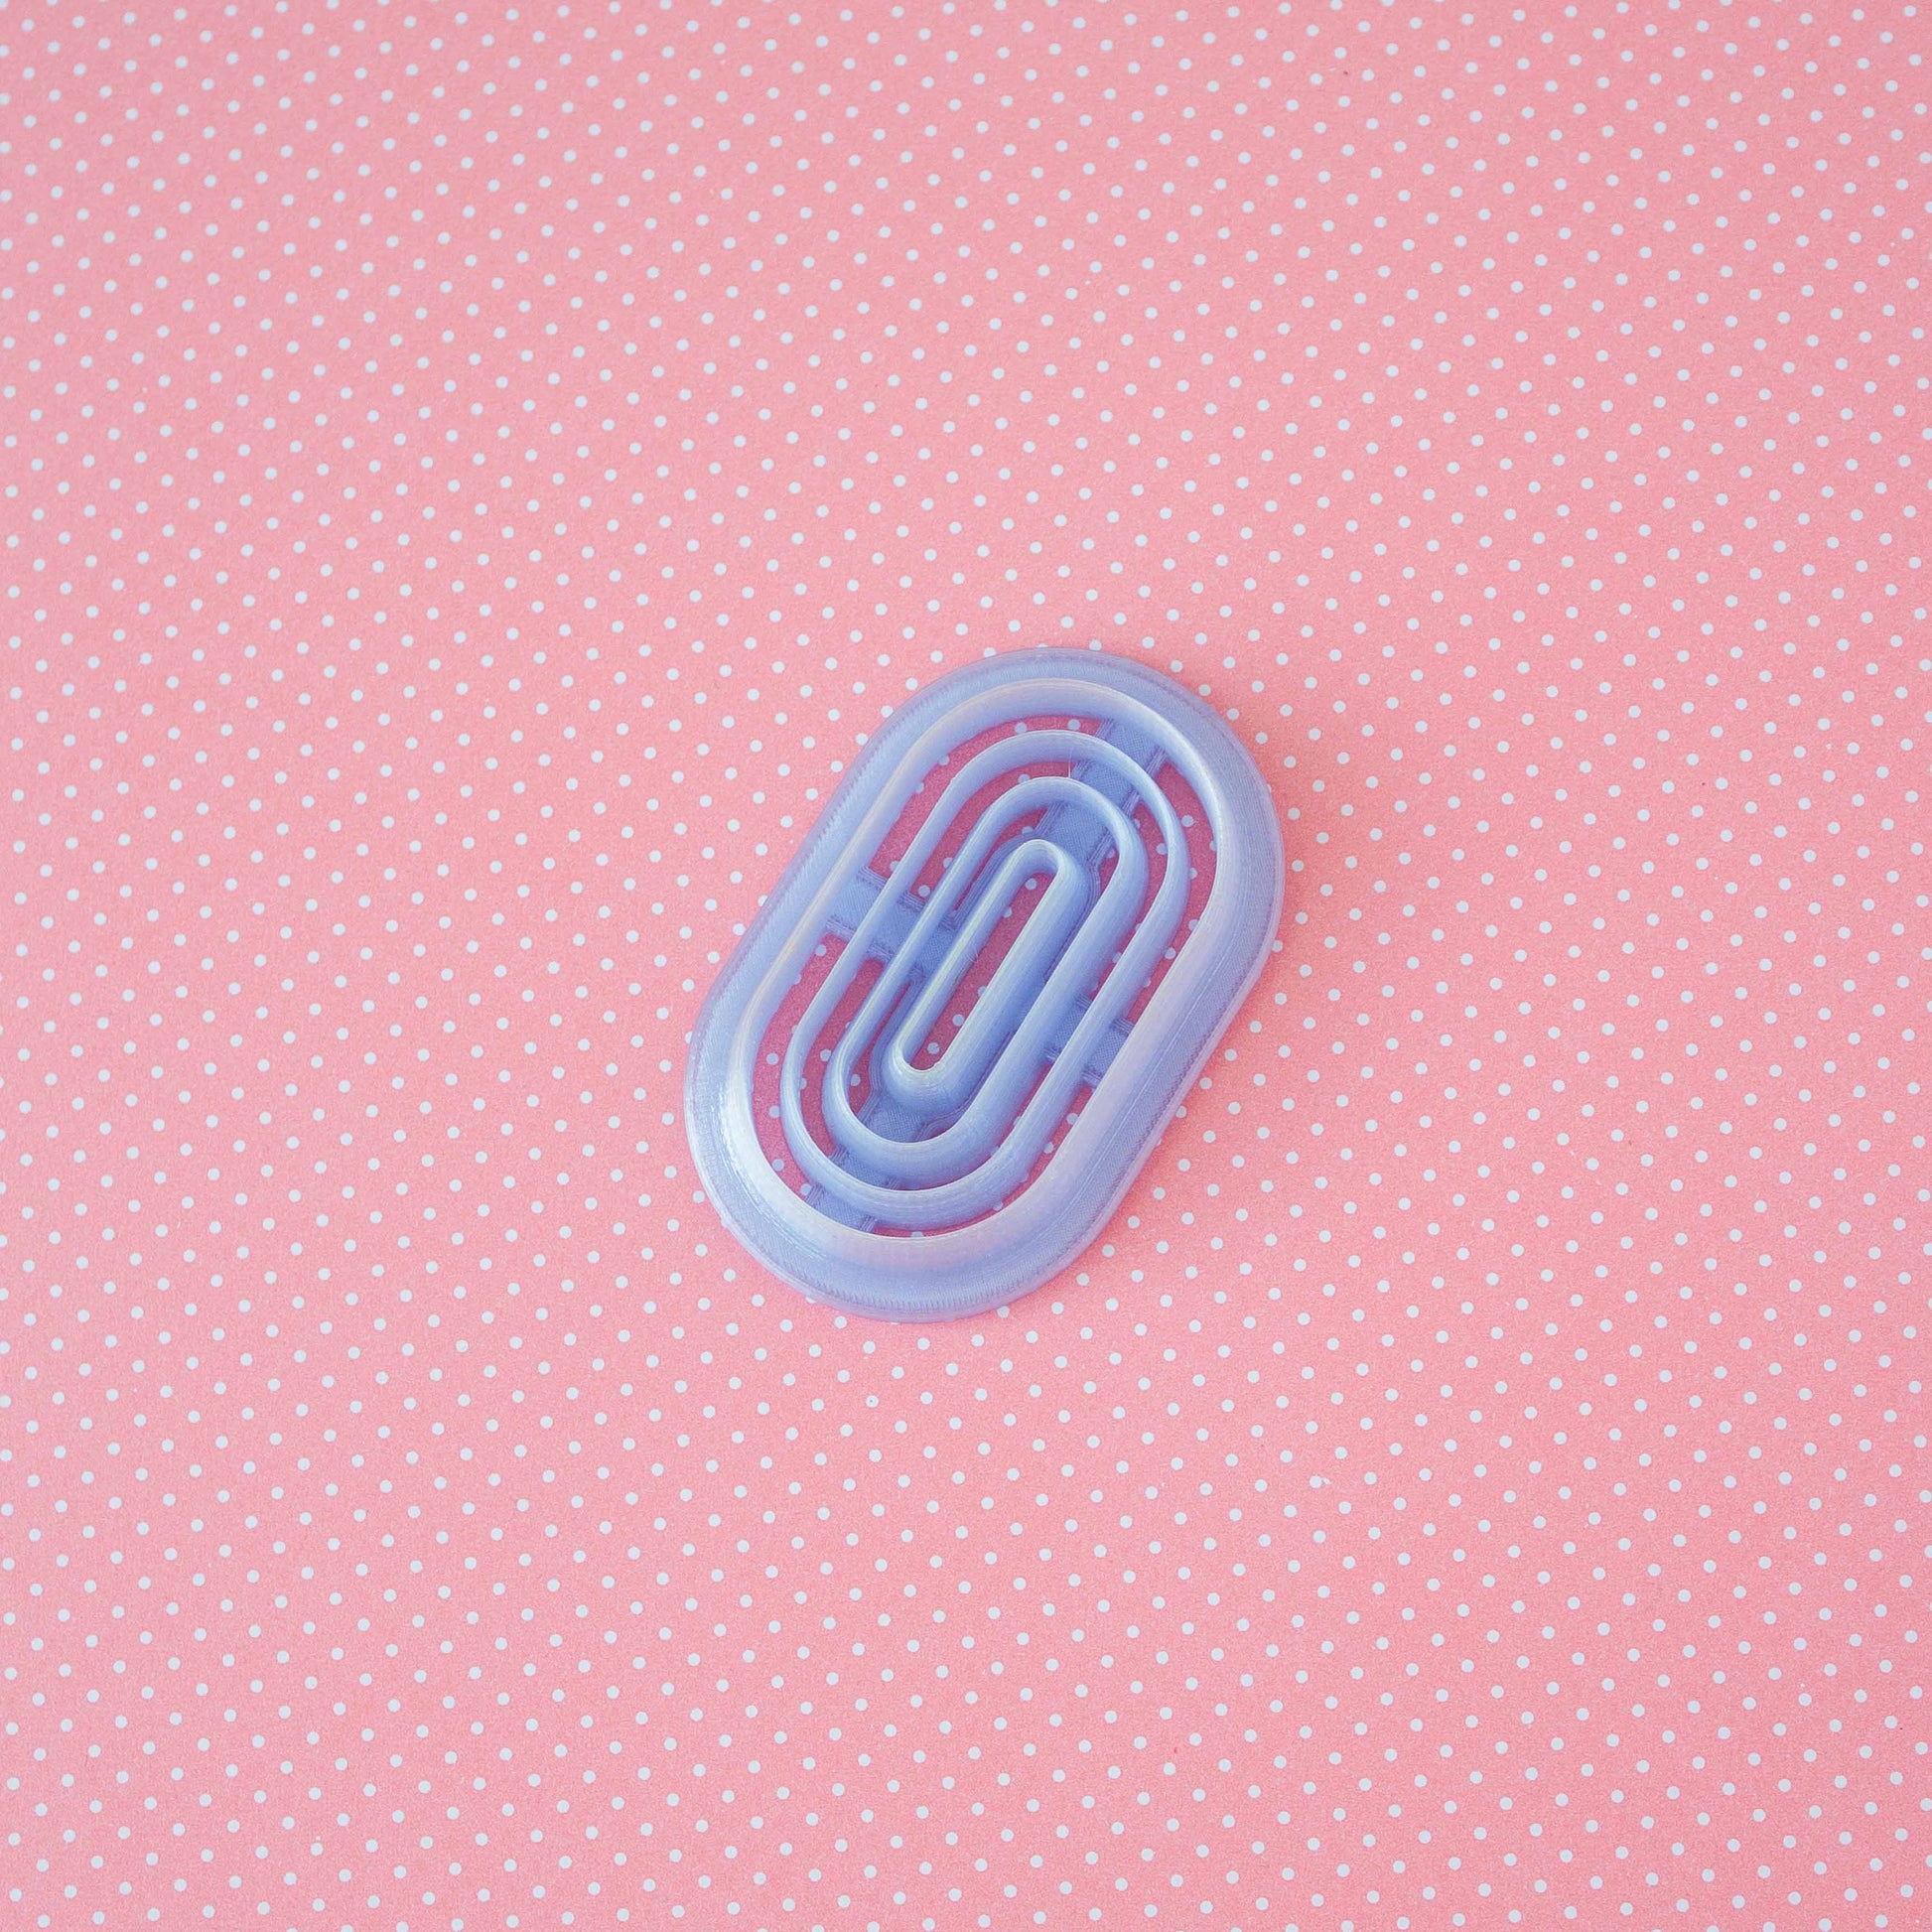 Donut polymer clay cutter on a pink background.